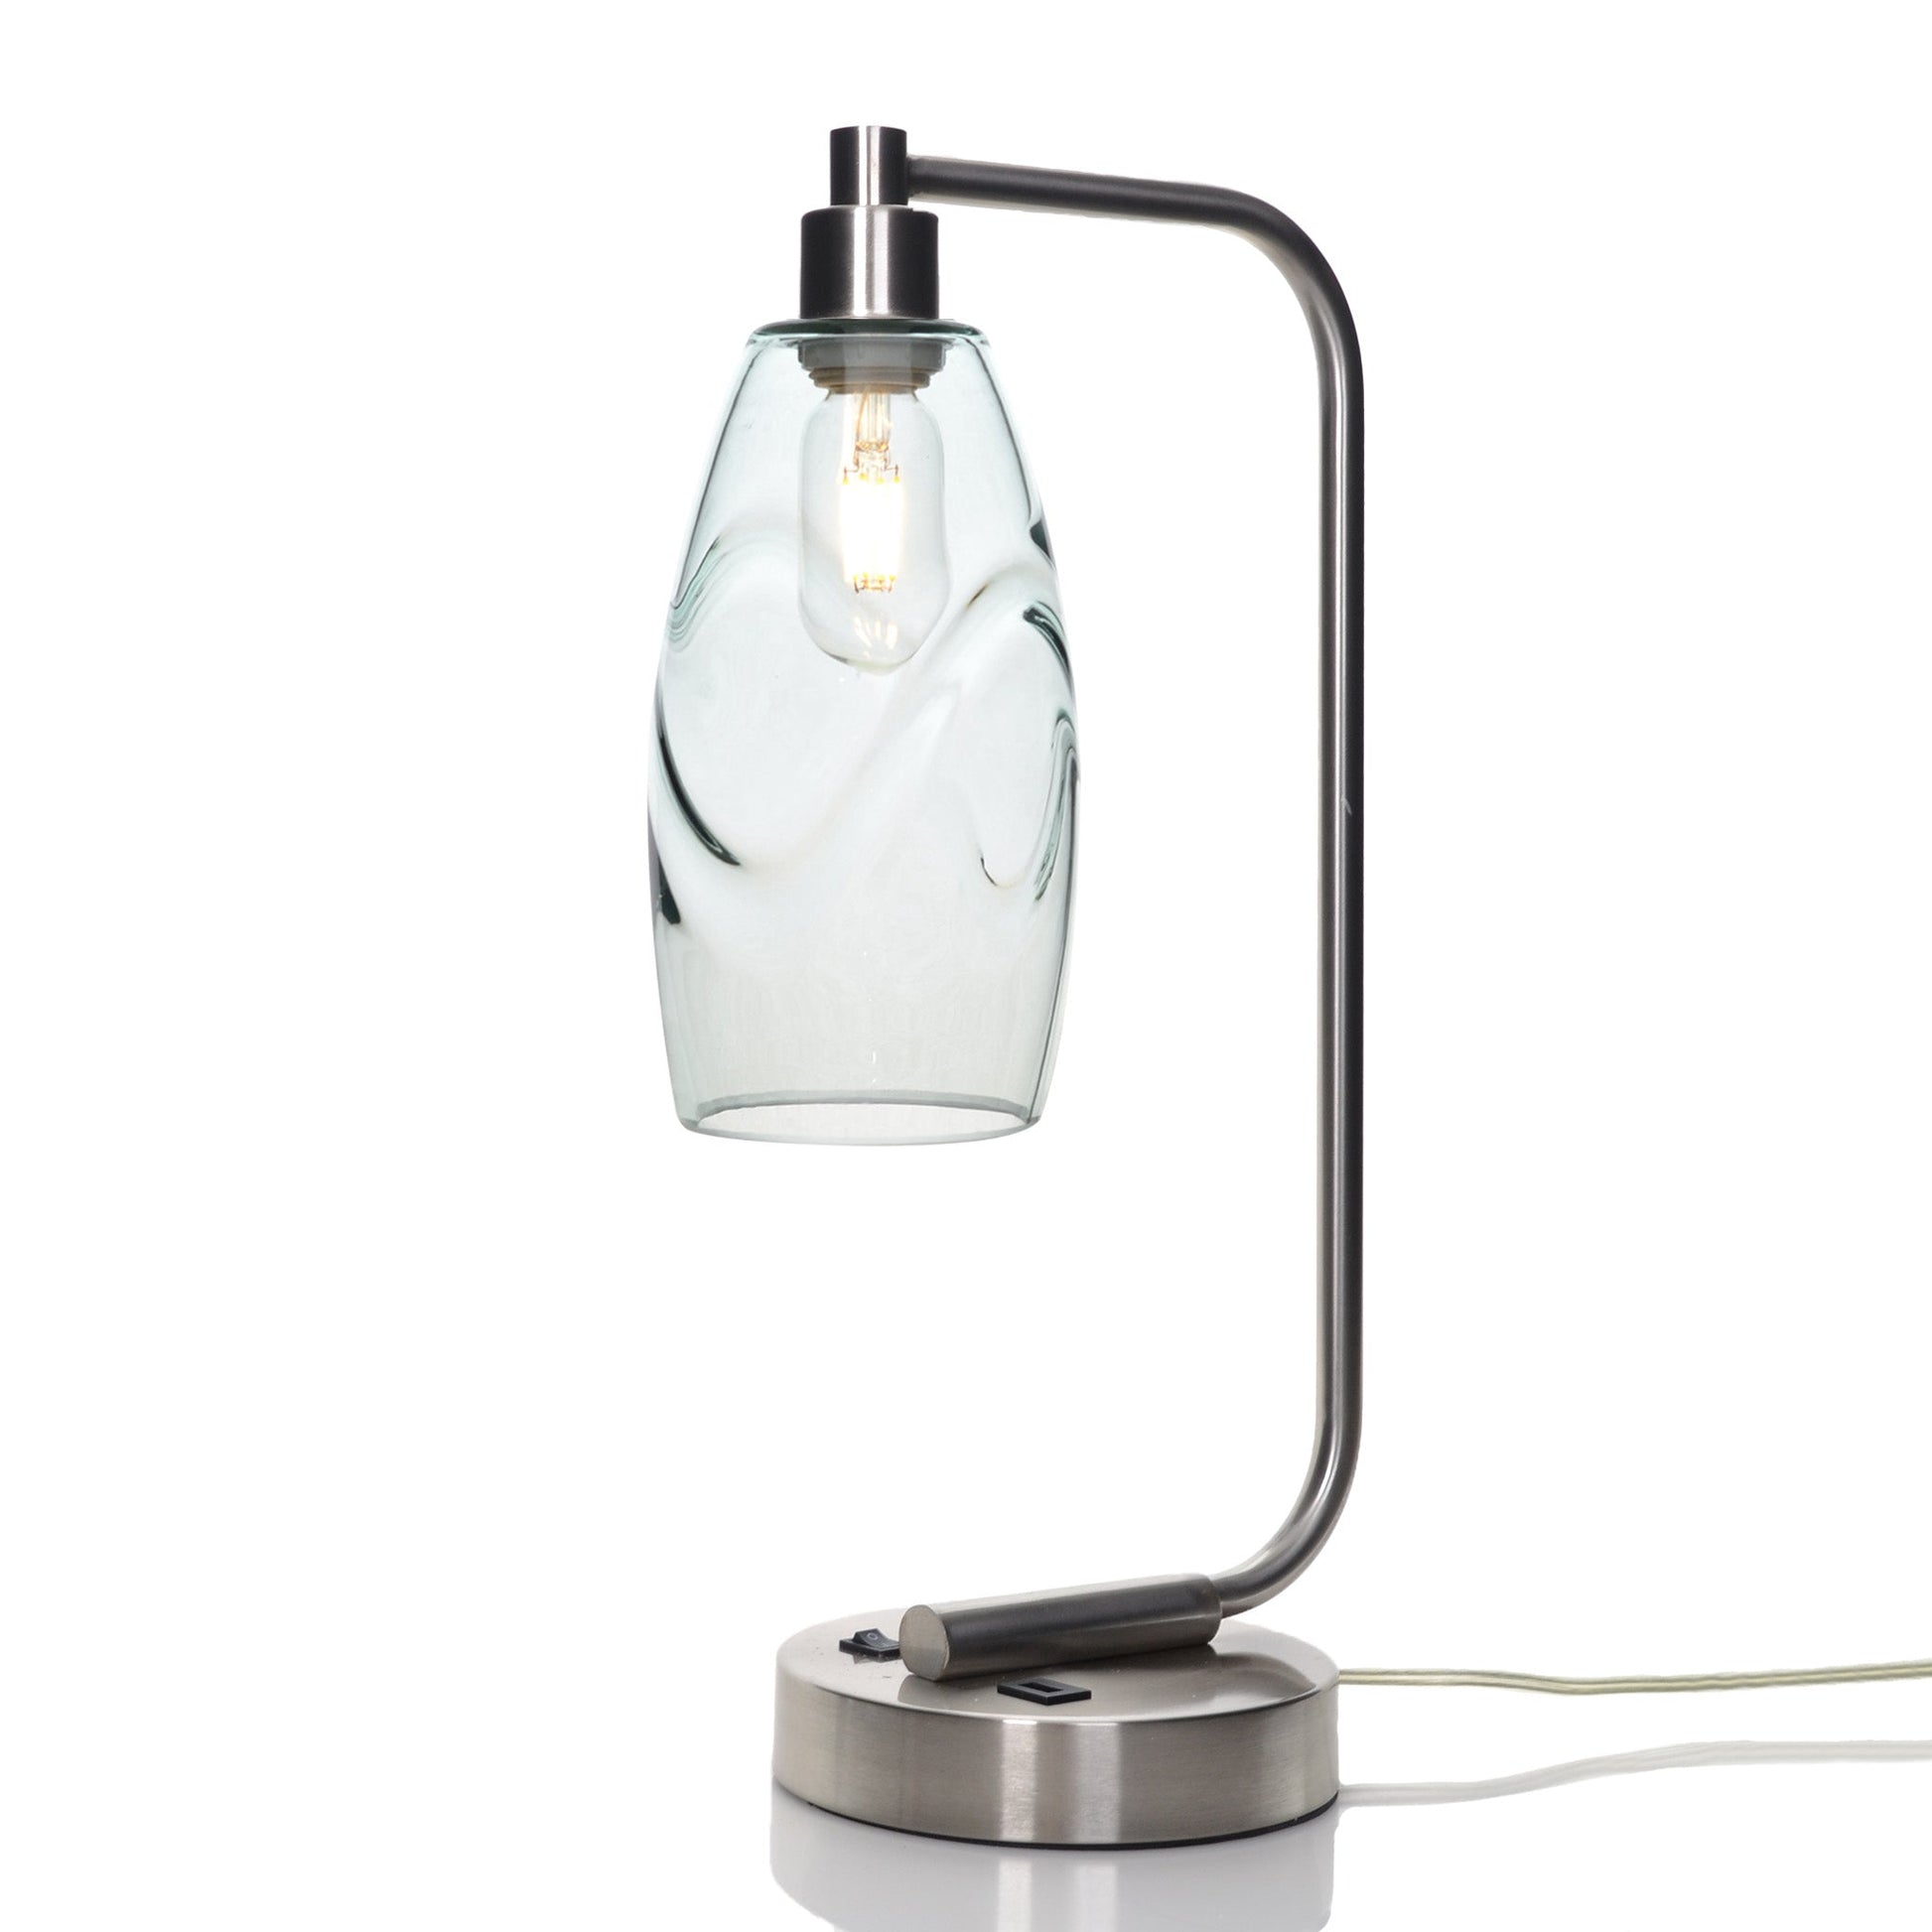 147 Swell: Table Lamp-Glass-Bicycle Glass Co - Hotshop-Eco Clear-Brushed Nickel-4 Watt LED (+$0.00)-Bicycle Glass Co